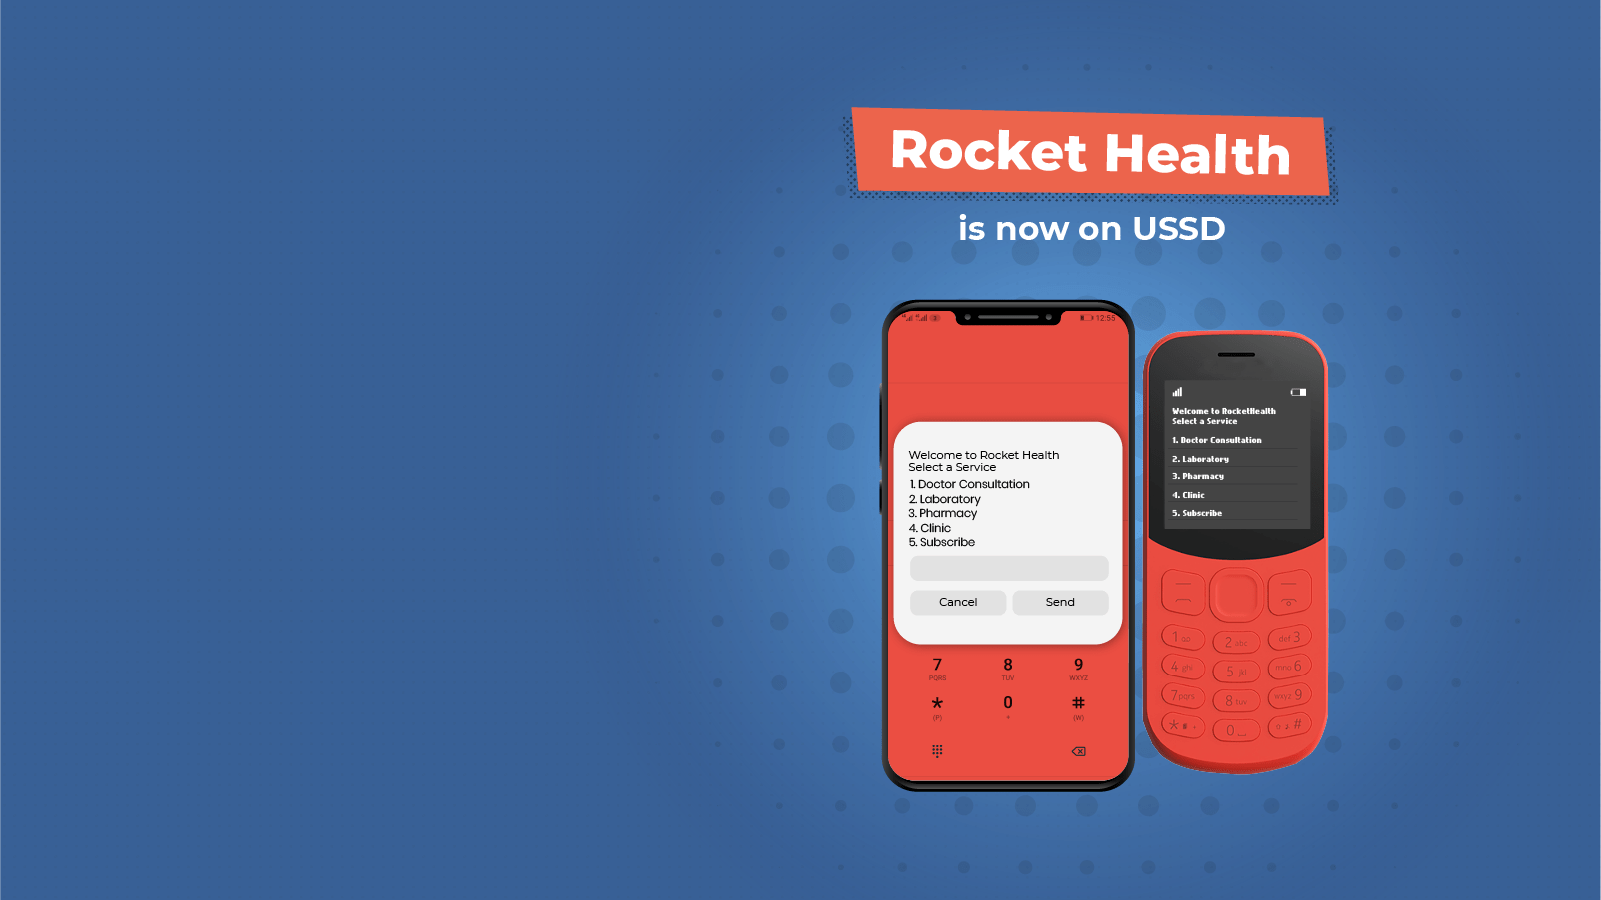 Accessing Rocket Health services